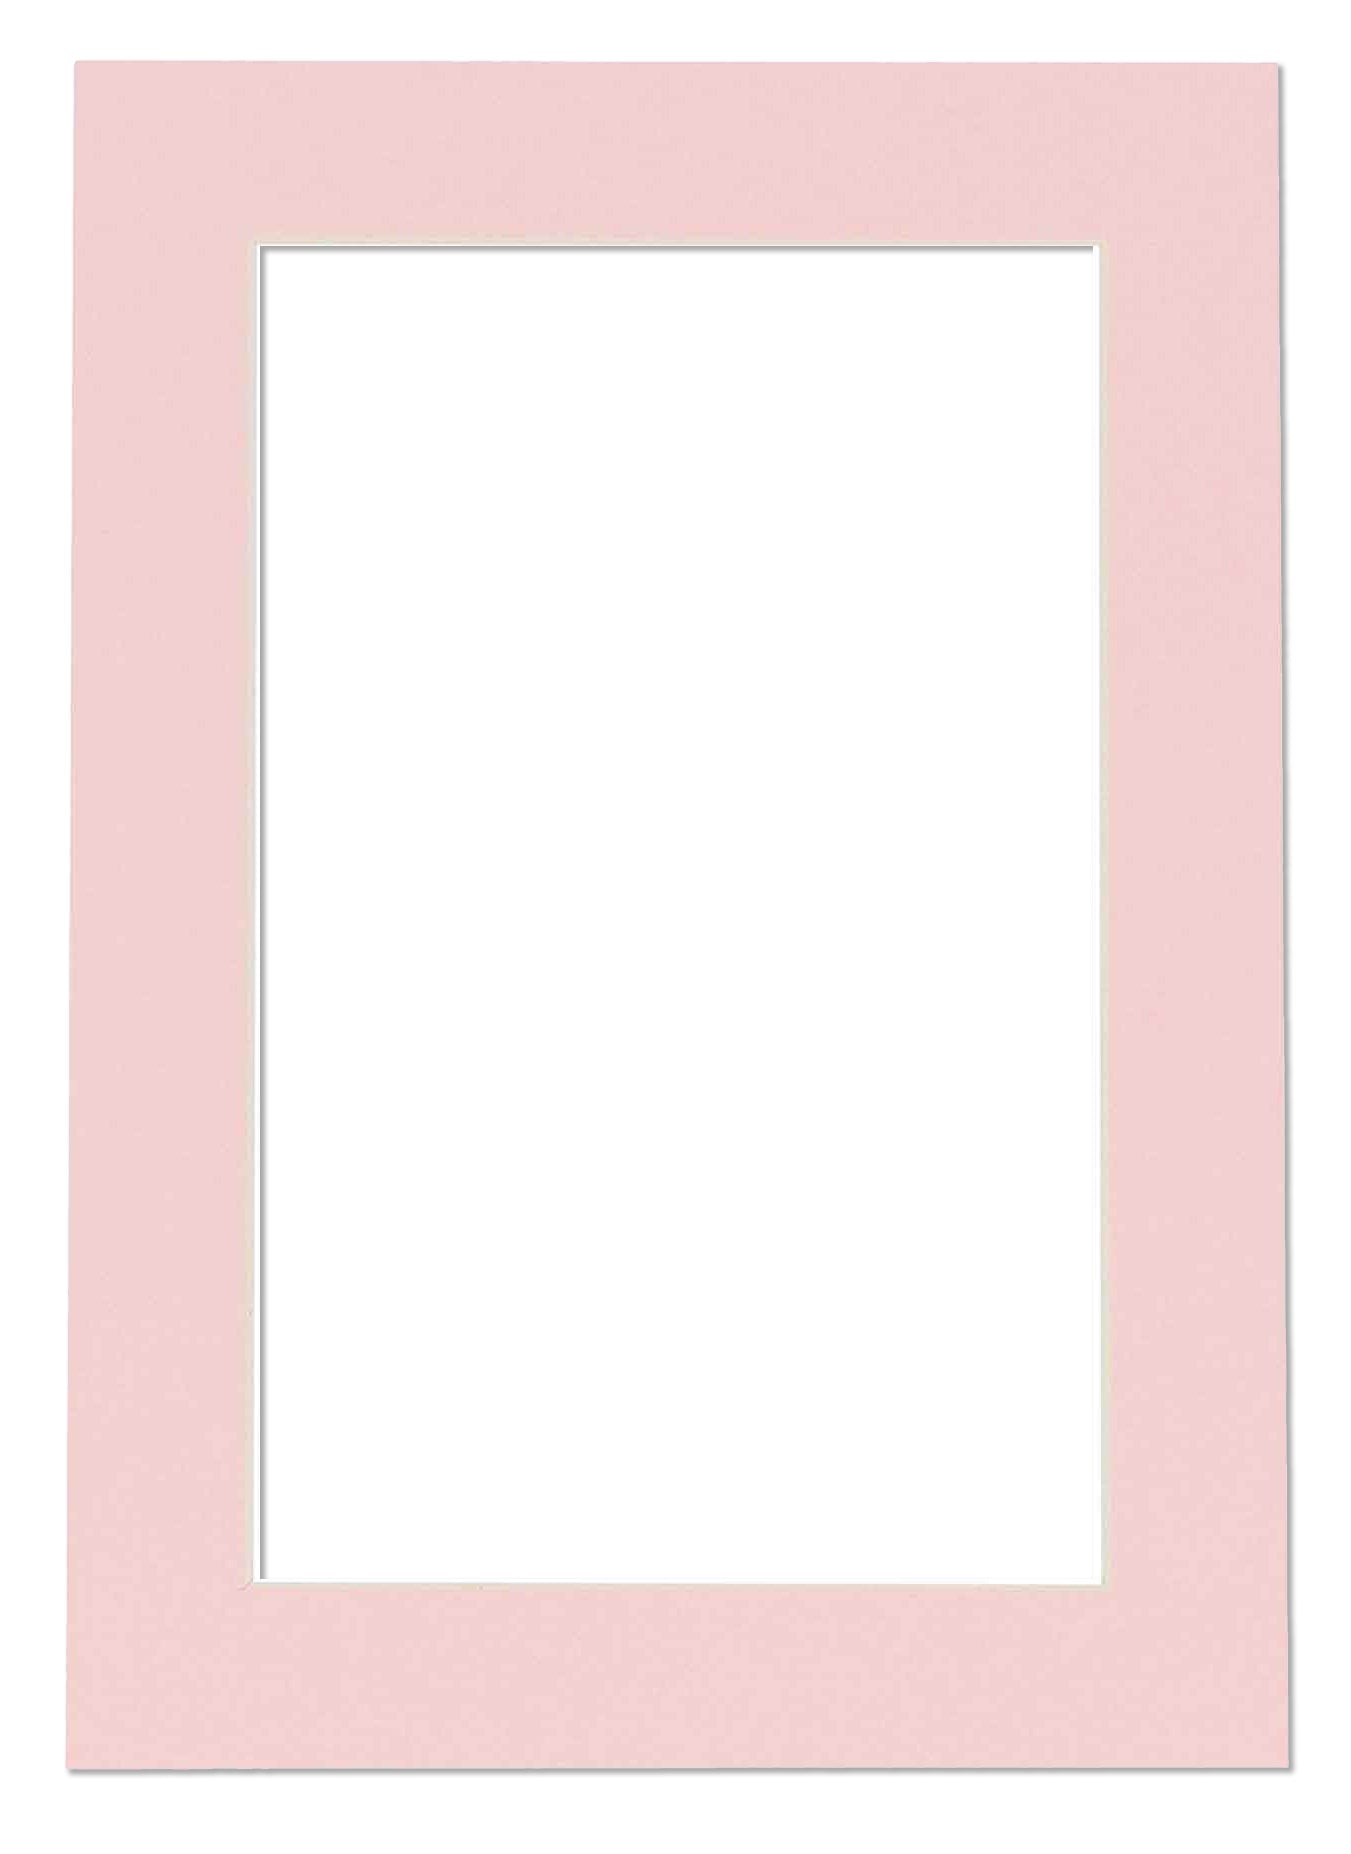  11x14 Mat for 13x19 Frame - Precut Mat Board Acid-Free Show Kit  with Backing Board, and Clear Bags White 11x14 Photo Matte Made to Fit a  13x19 Picture Frame Matboard for